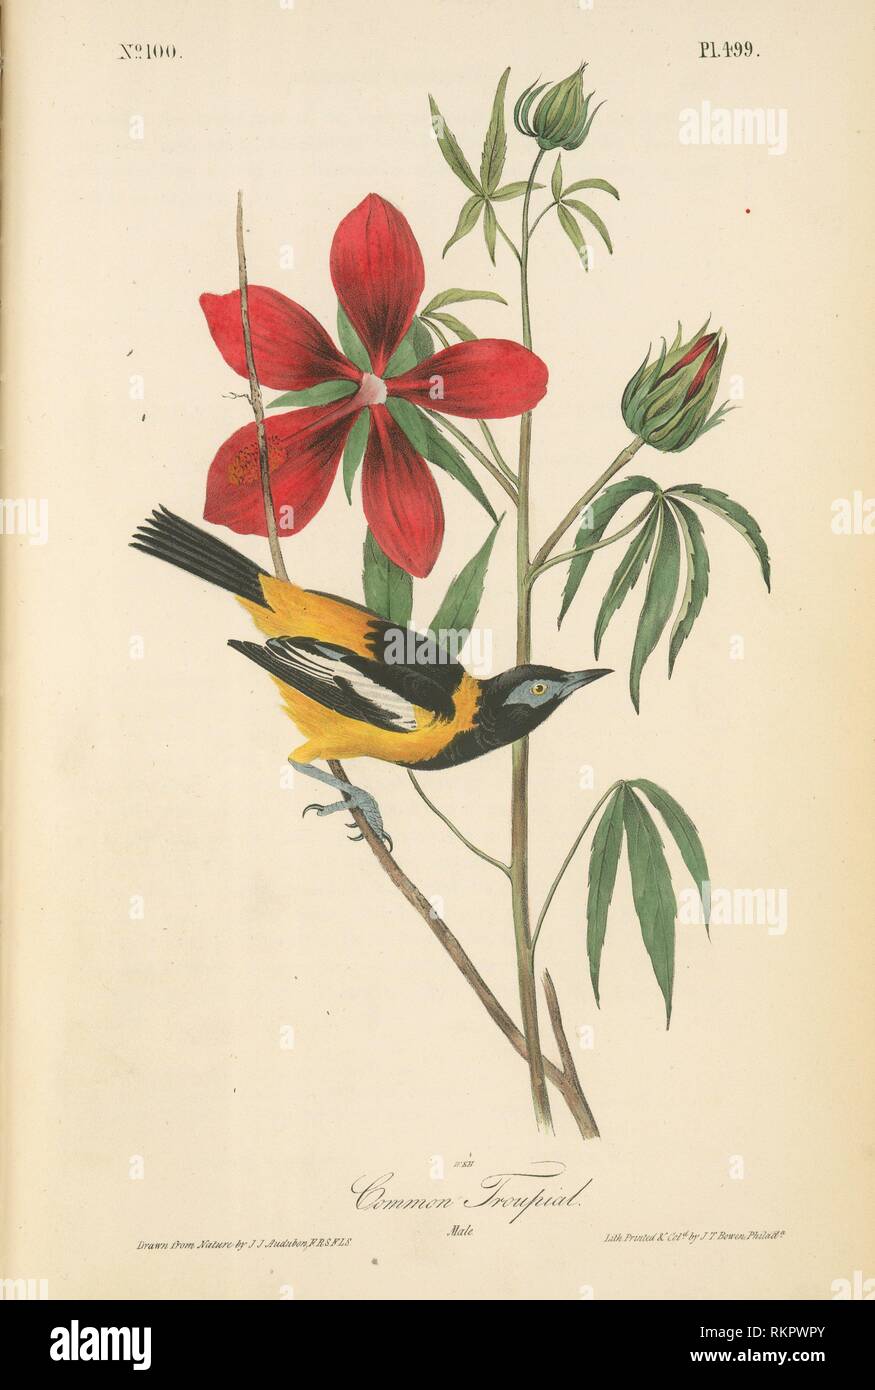 Common Troupial. Male. Audubon, John James, 1785-1851 (Artist). The birds of America, from drawings made in the United States and their territories. Stock Photo